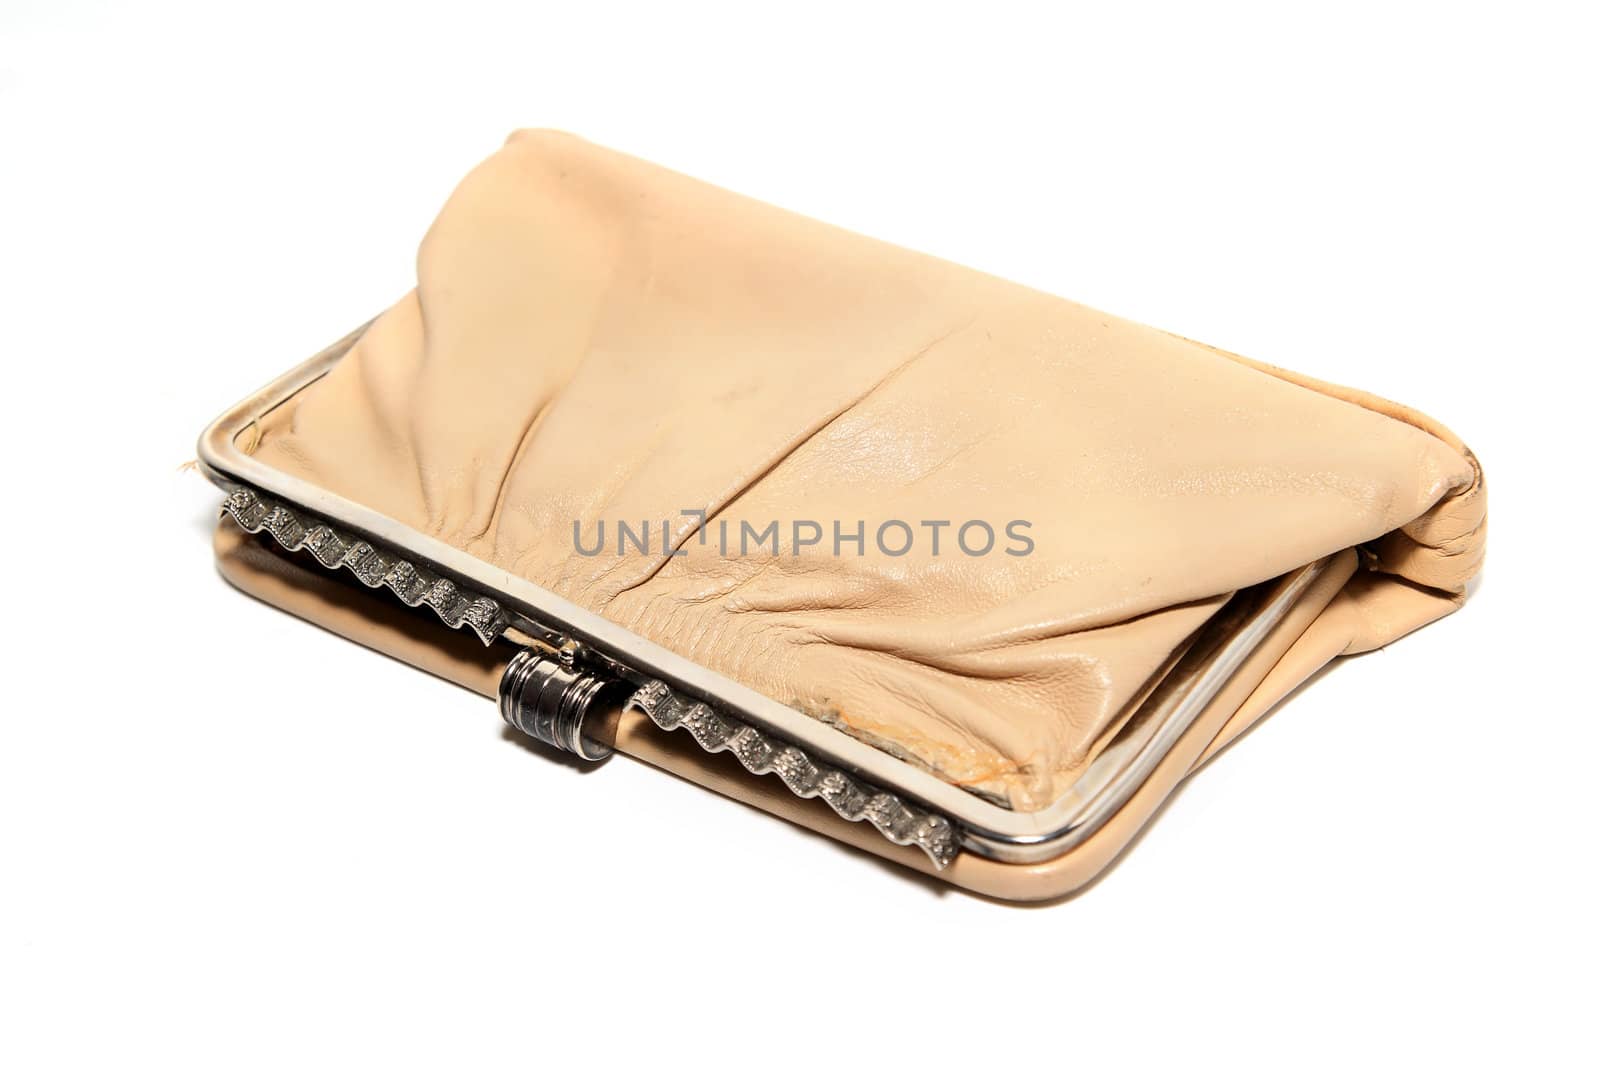 old purse on white background